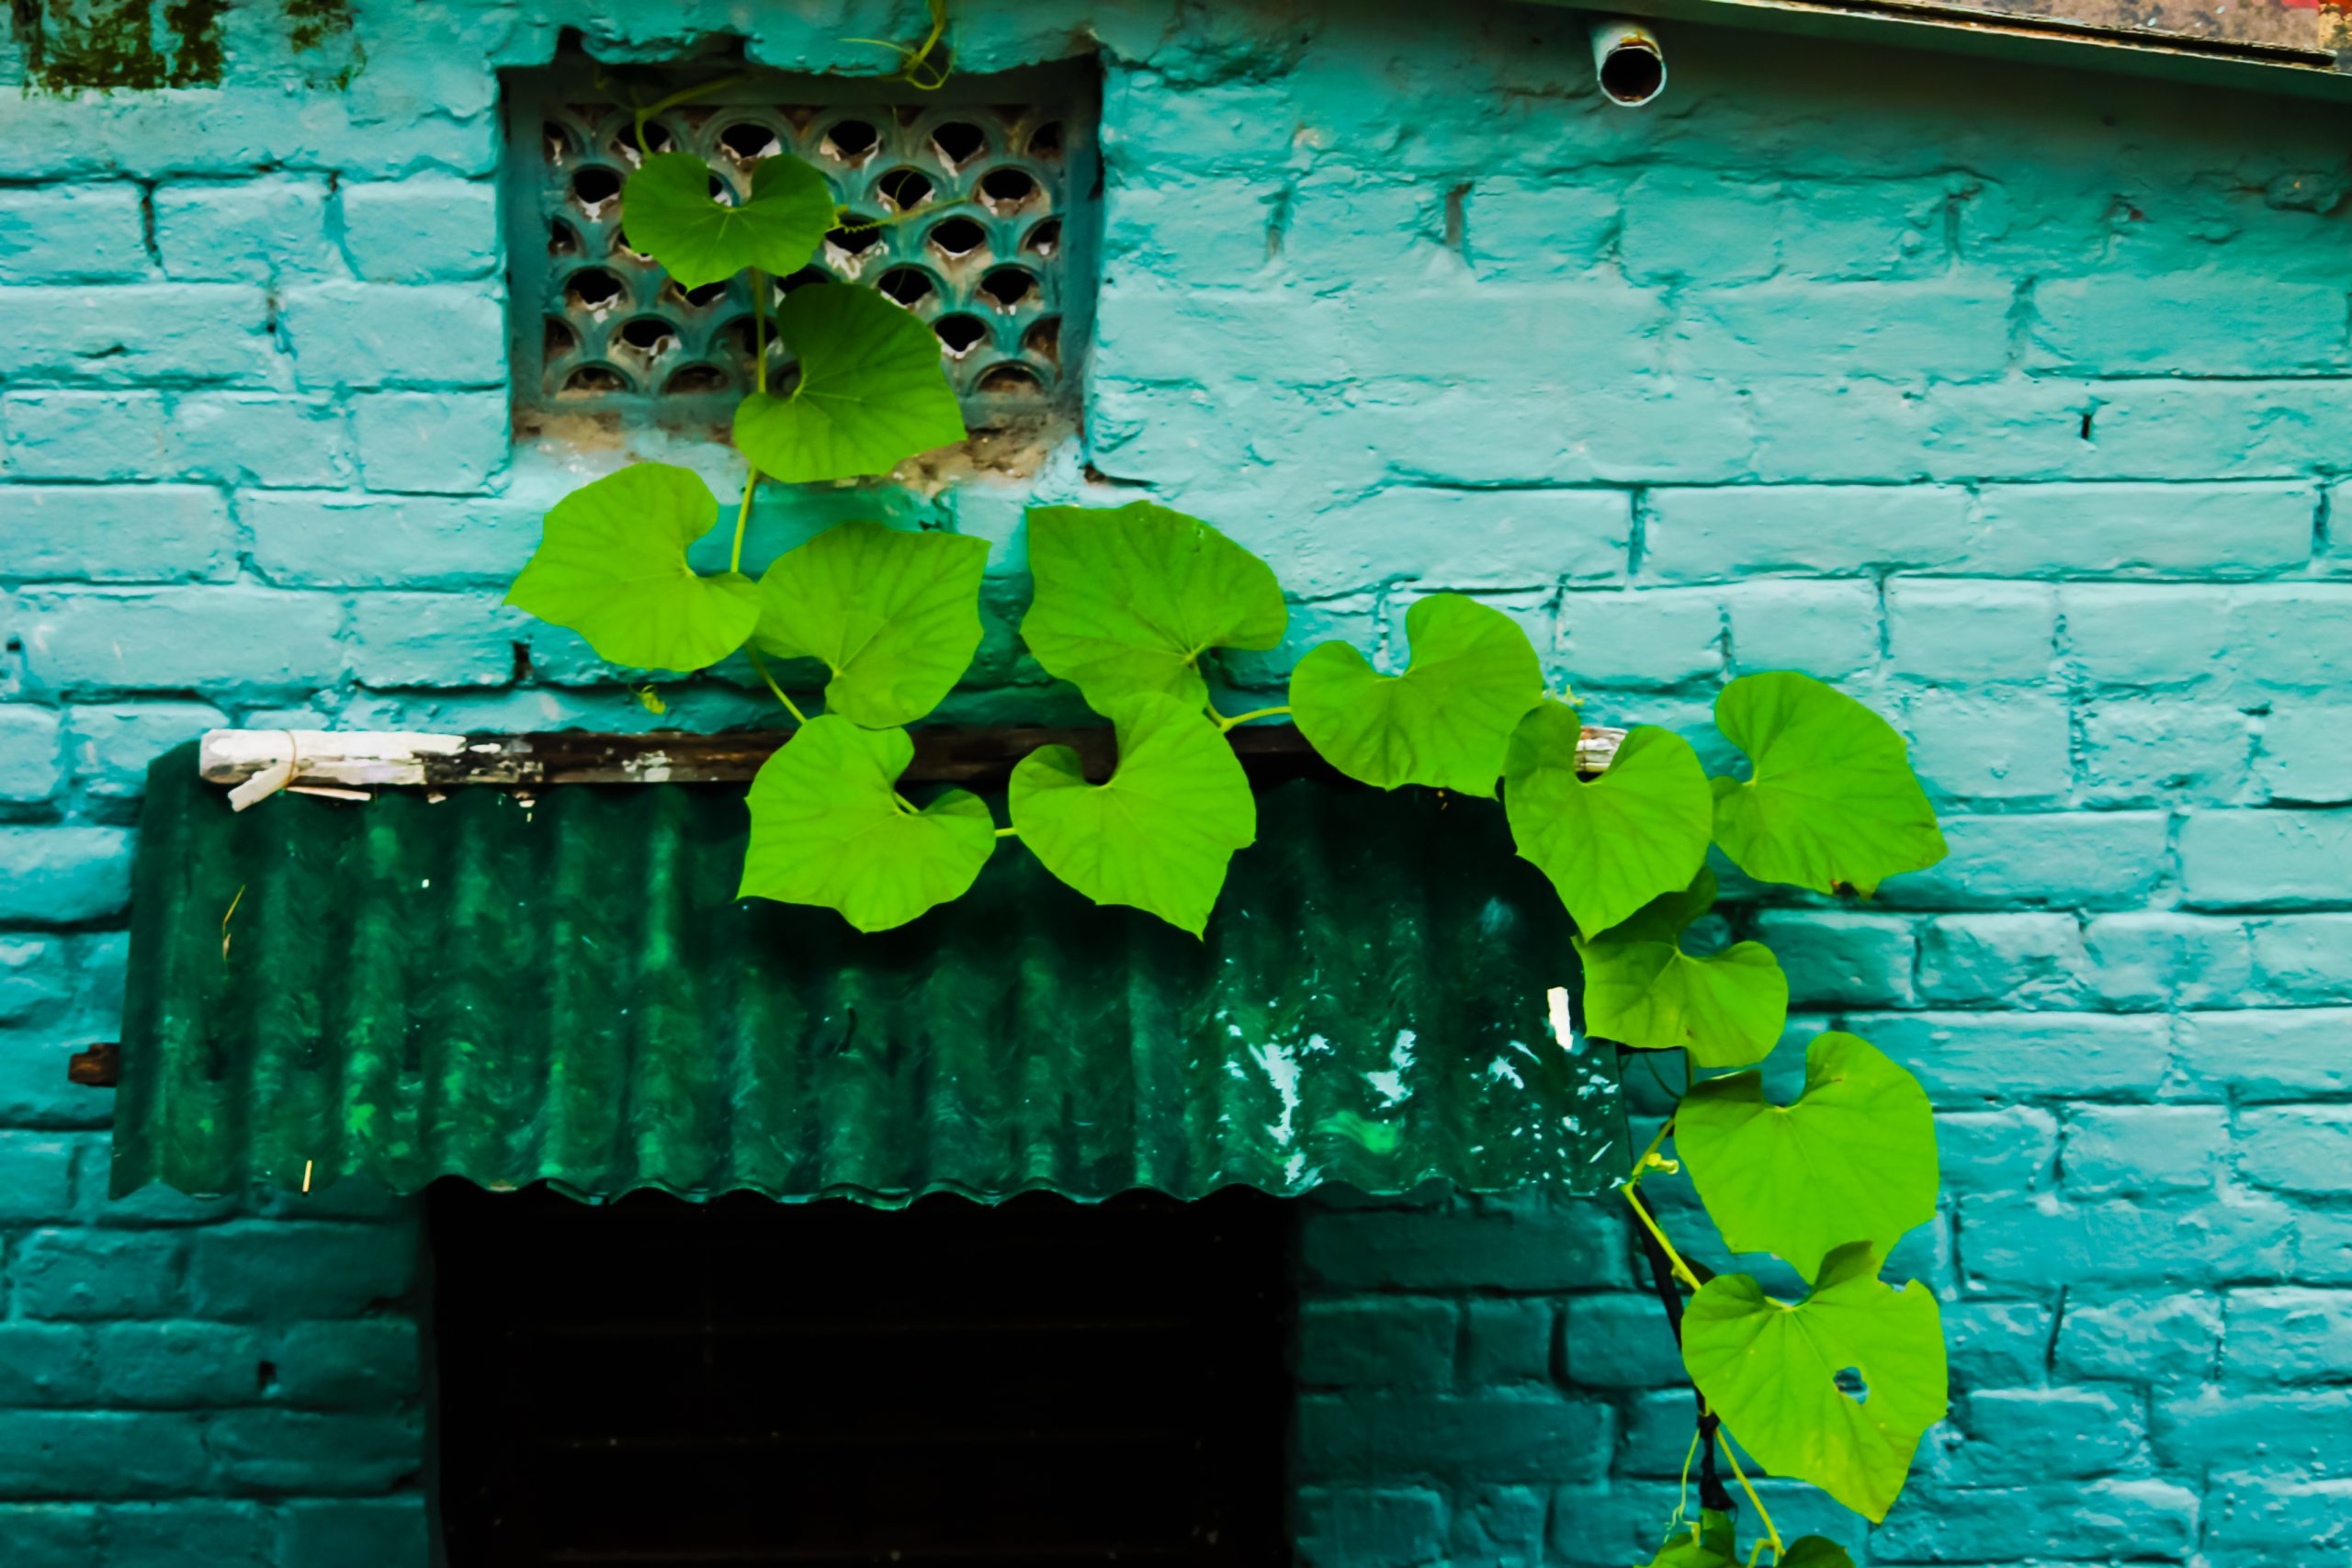 A creeper plant on a wall